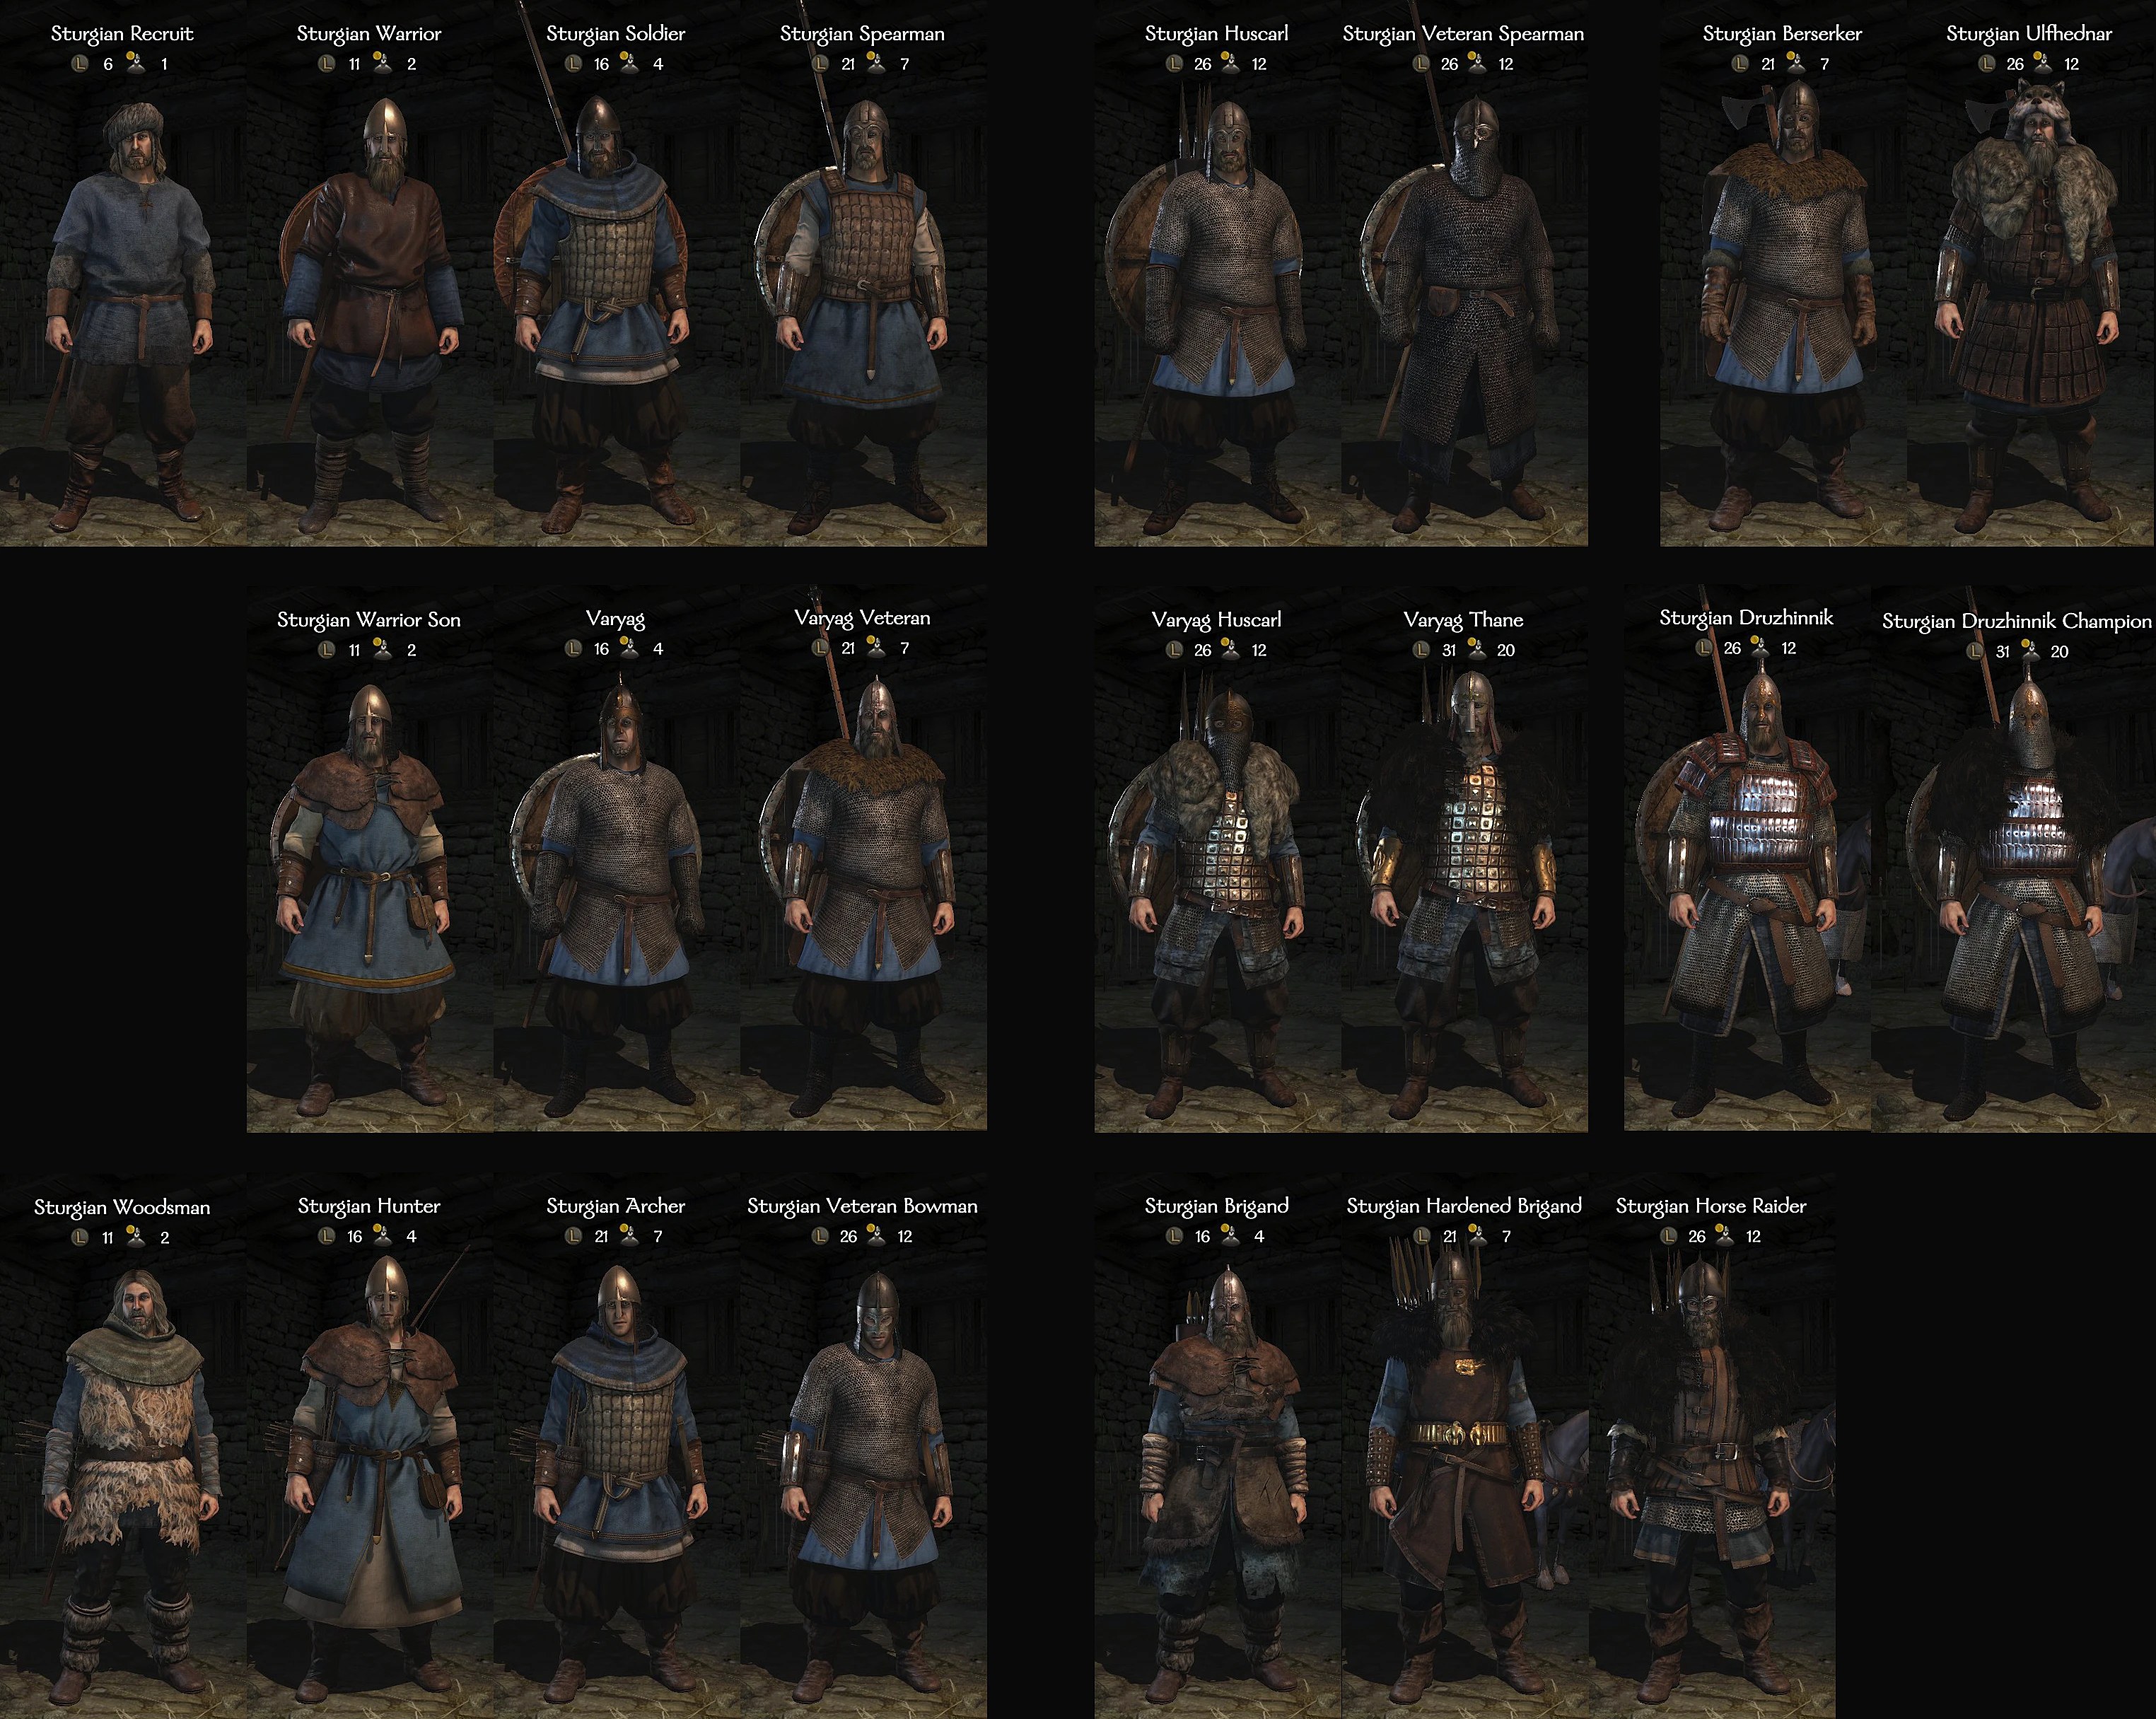 Bannerlord 2 юниты. Mount and Blade 2 Bannerlord СТУРГИЯ. Карта баннерлорд 2. Mount and Blade 2 Bannerlord Sturgians. Mount and Blade 2 Bannerlord Викинги.